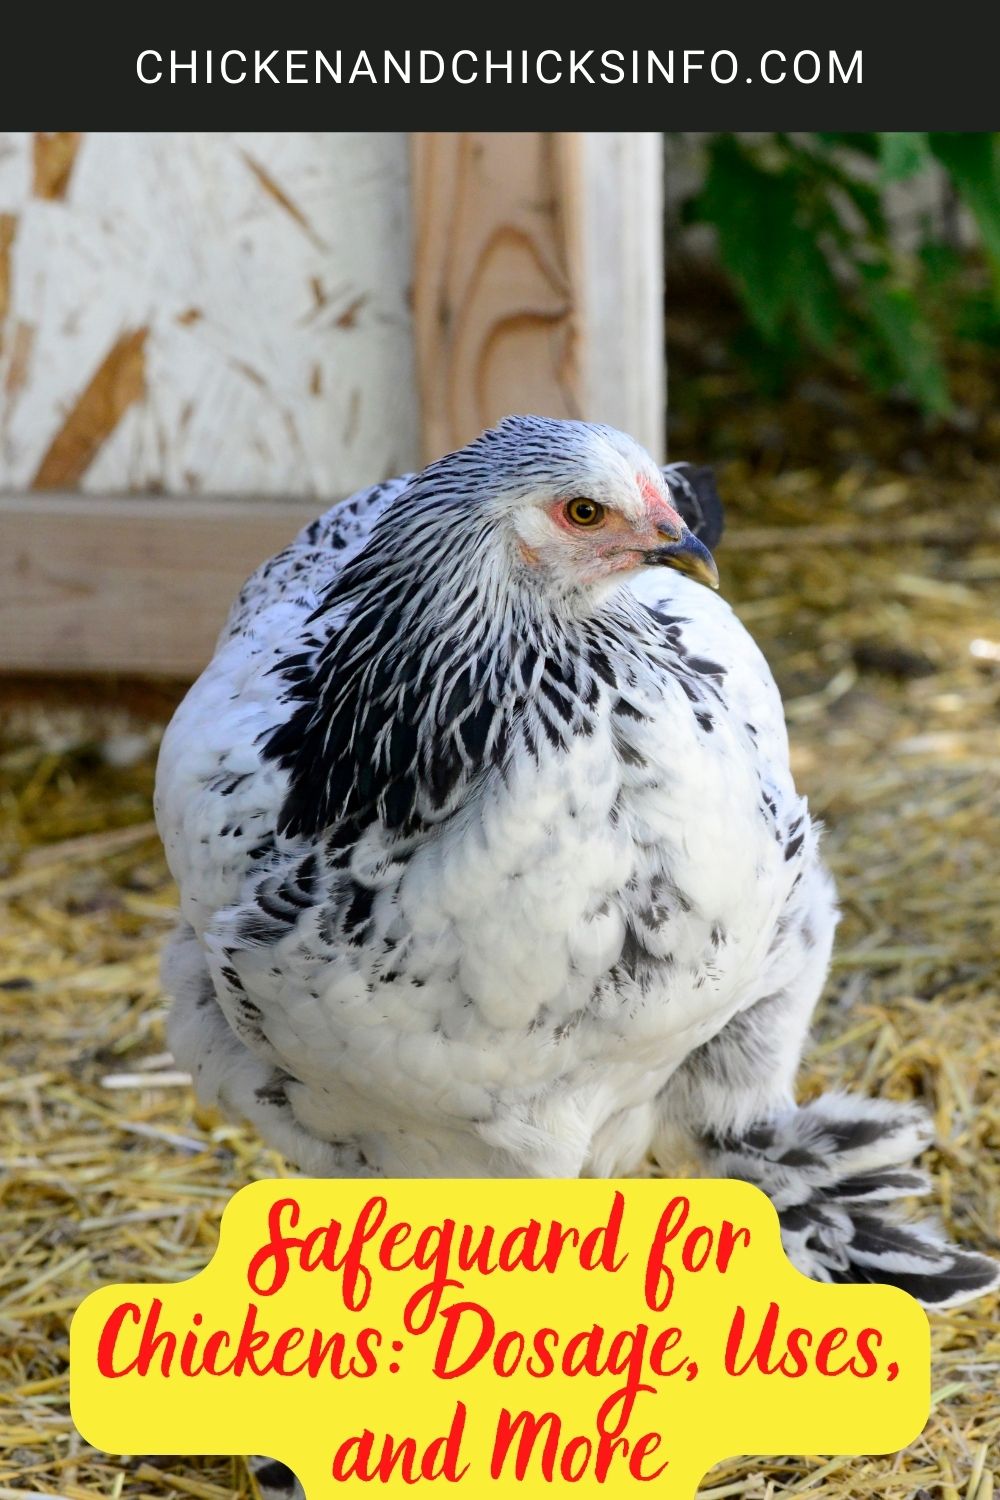 Safeguard for Chickens: Dosage, Uses, and More poster.
